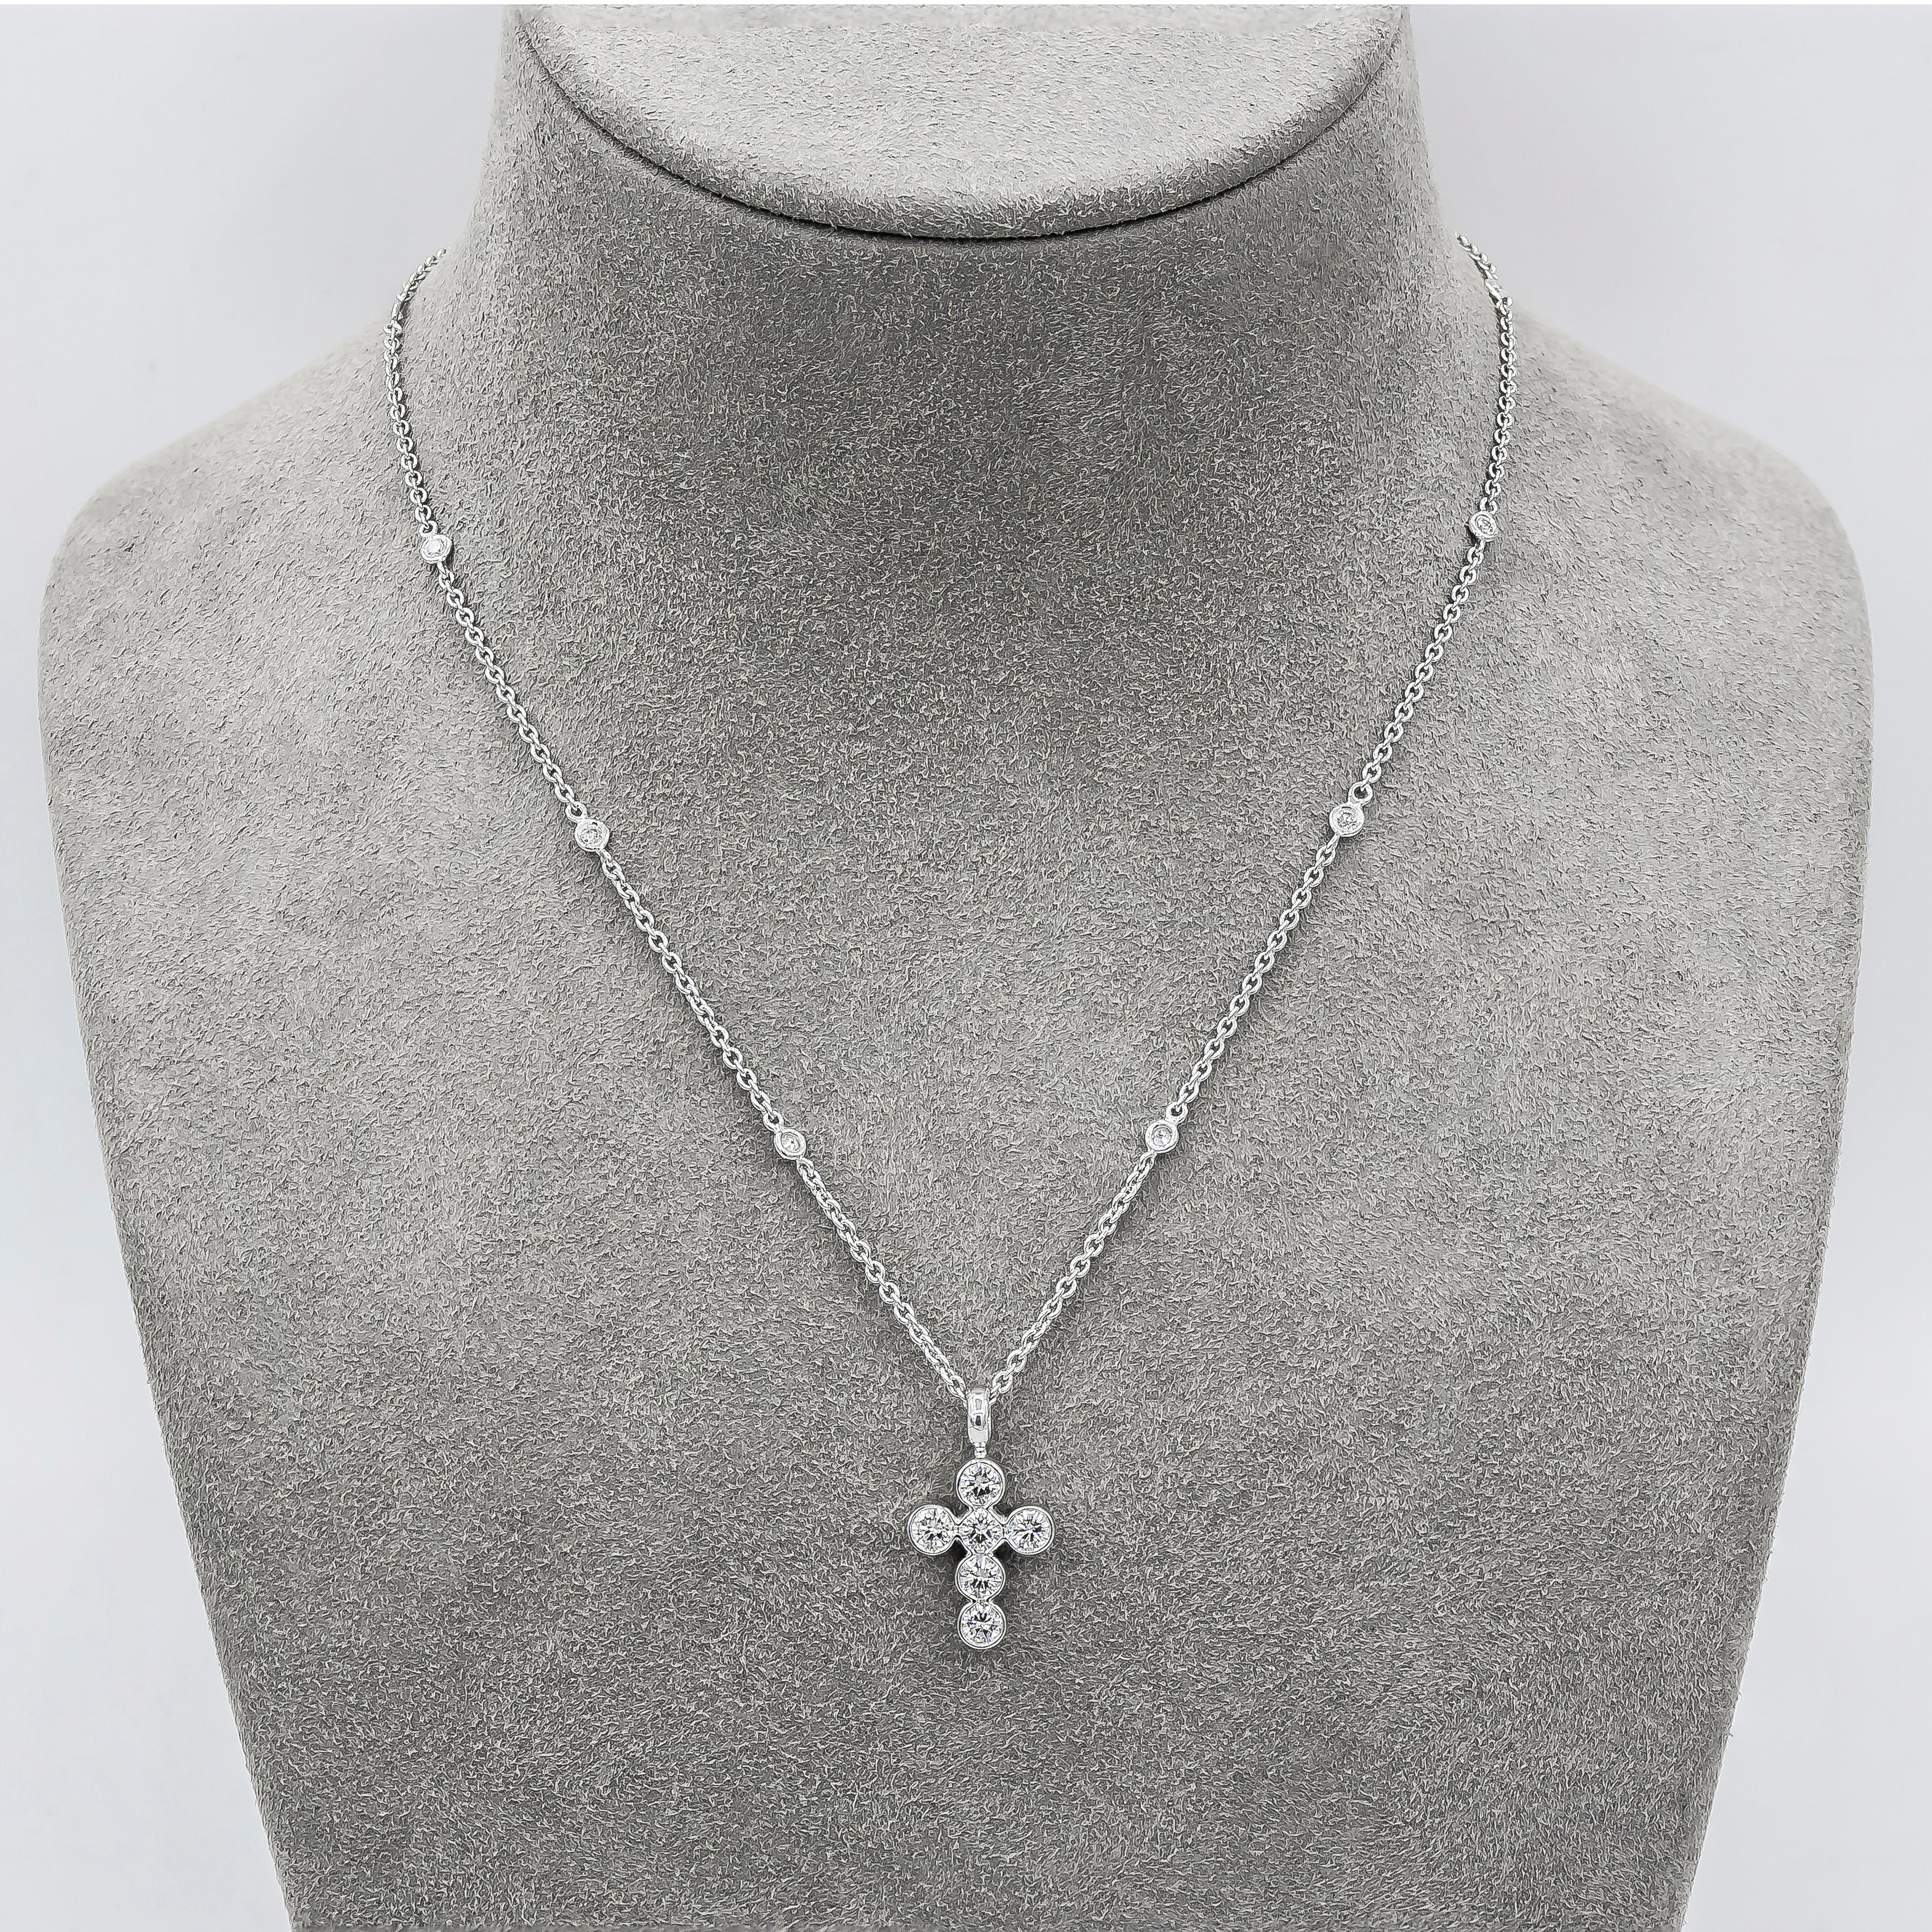 A brilliant pendant necklace showcasing six round diamonds bezel set in an 18 karat white gold cross design. Suspended on a diamond by the yard chain. Diamonds weigh 1.27 carats total.

Style available in different price ranges. Prices are based on